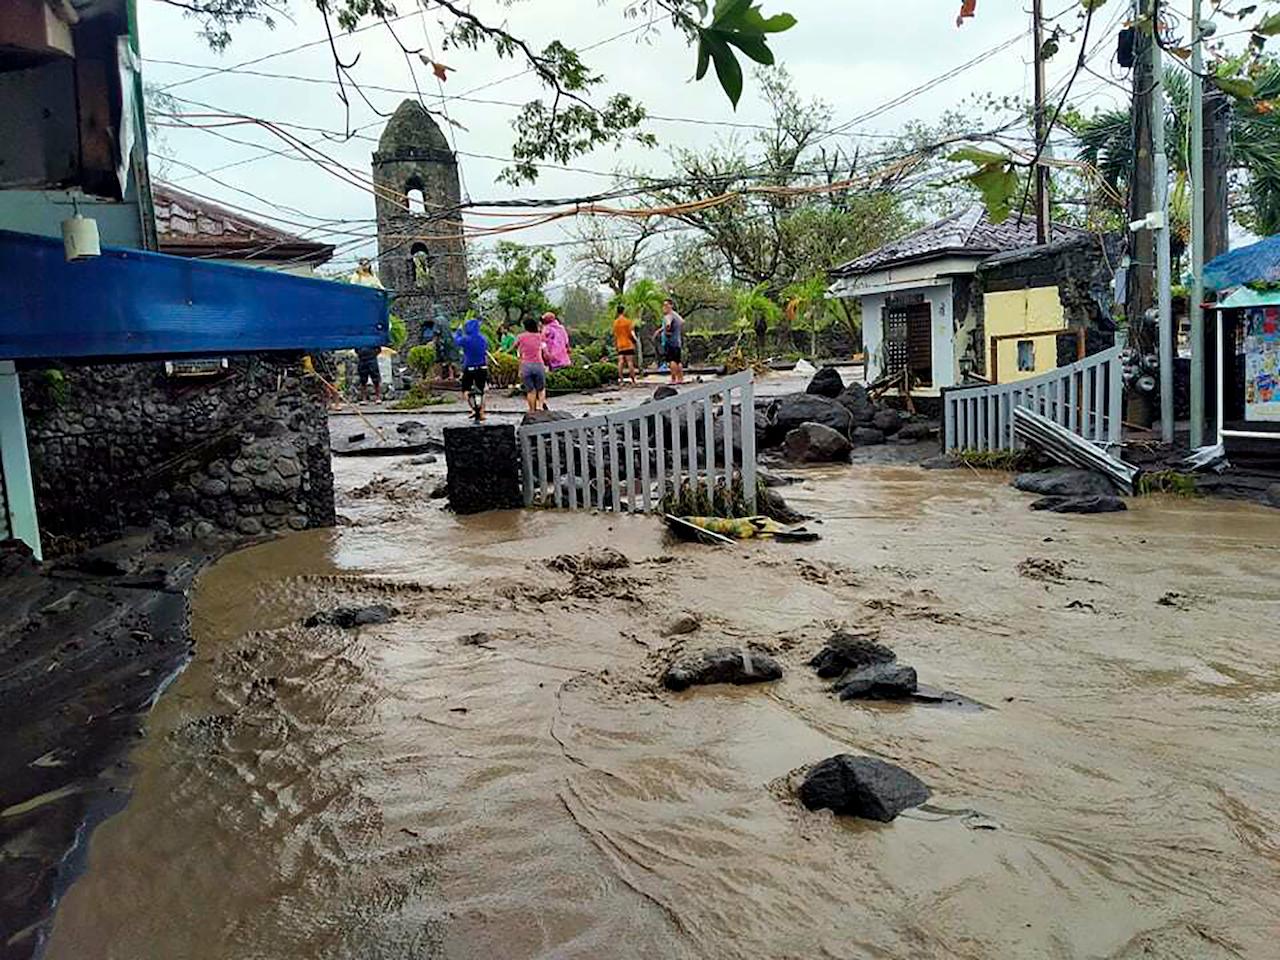 Floodwaters pass by Cagsawa ruins, a famous tourist spot in Daraga, Albay province, central Philippines as typhoon Goni hit the area on Nov 1. Photo: AP